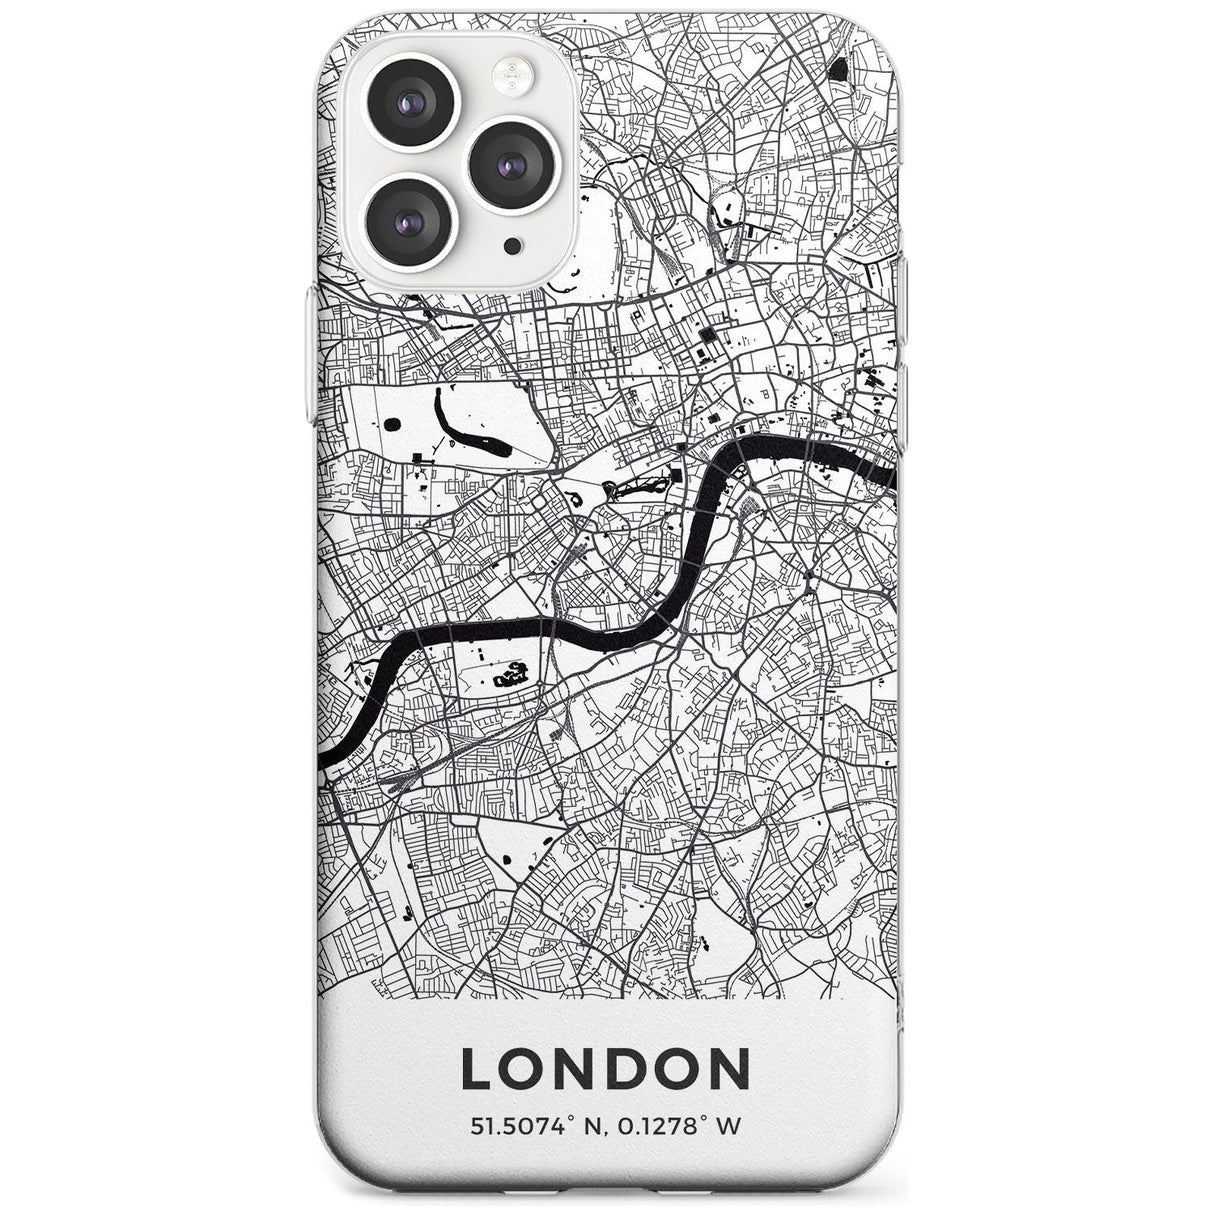 Map of London, England Slim TPU Phone Case for iPhone 11 Pro Max